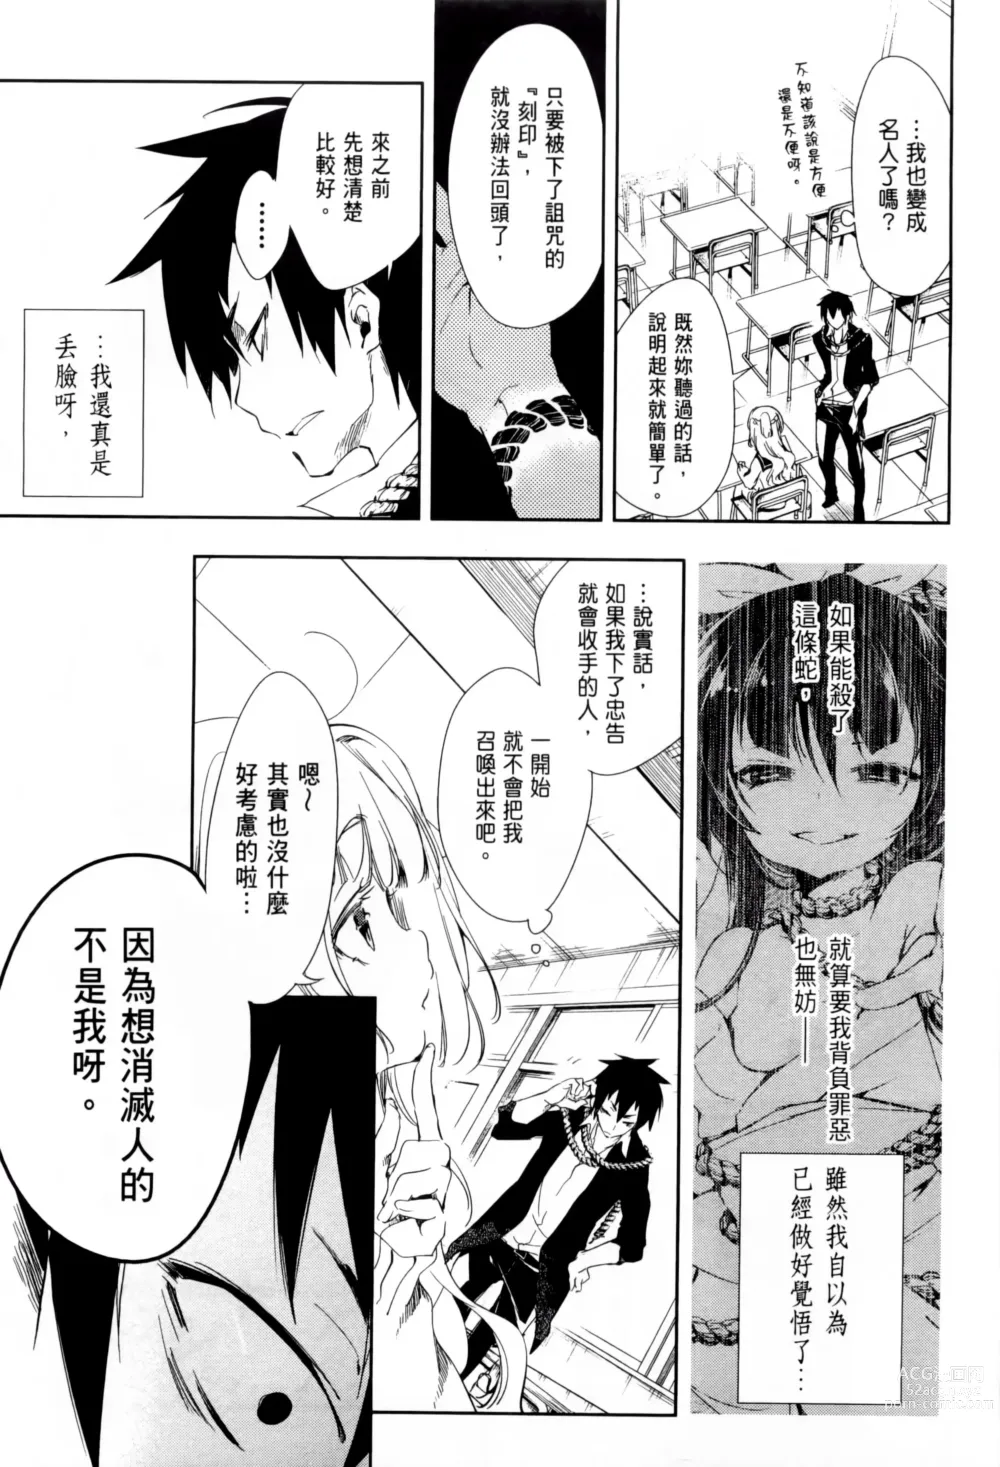 Page 104 of manga 神さまの怨結び 第1巻